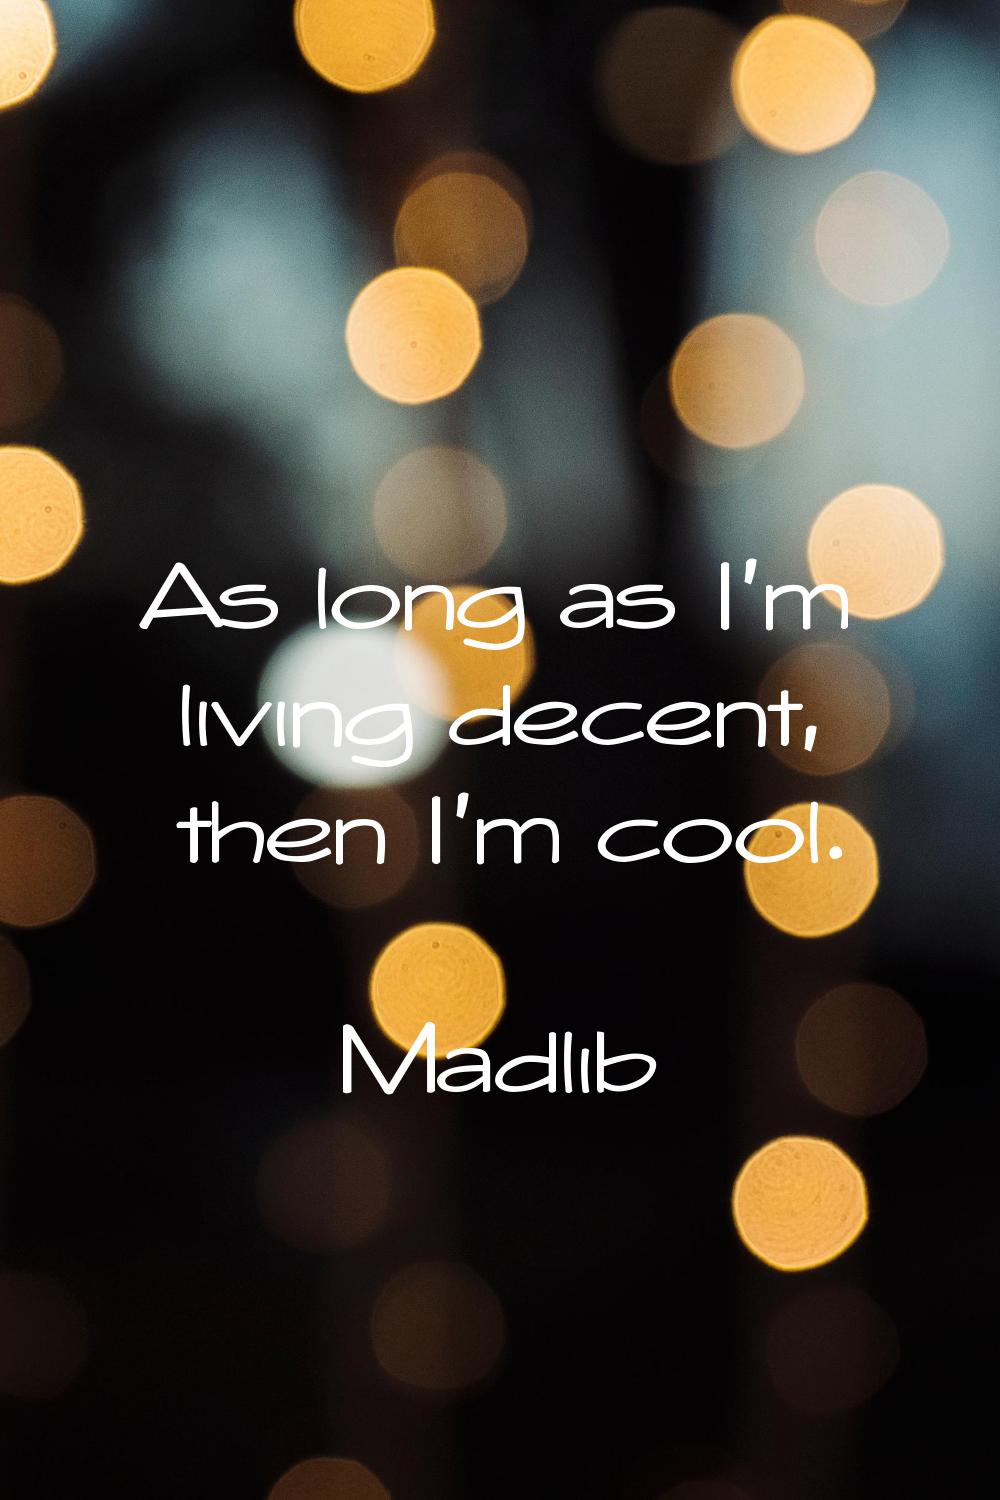 As long as I'm living decent, then I'm cool.